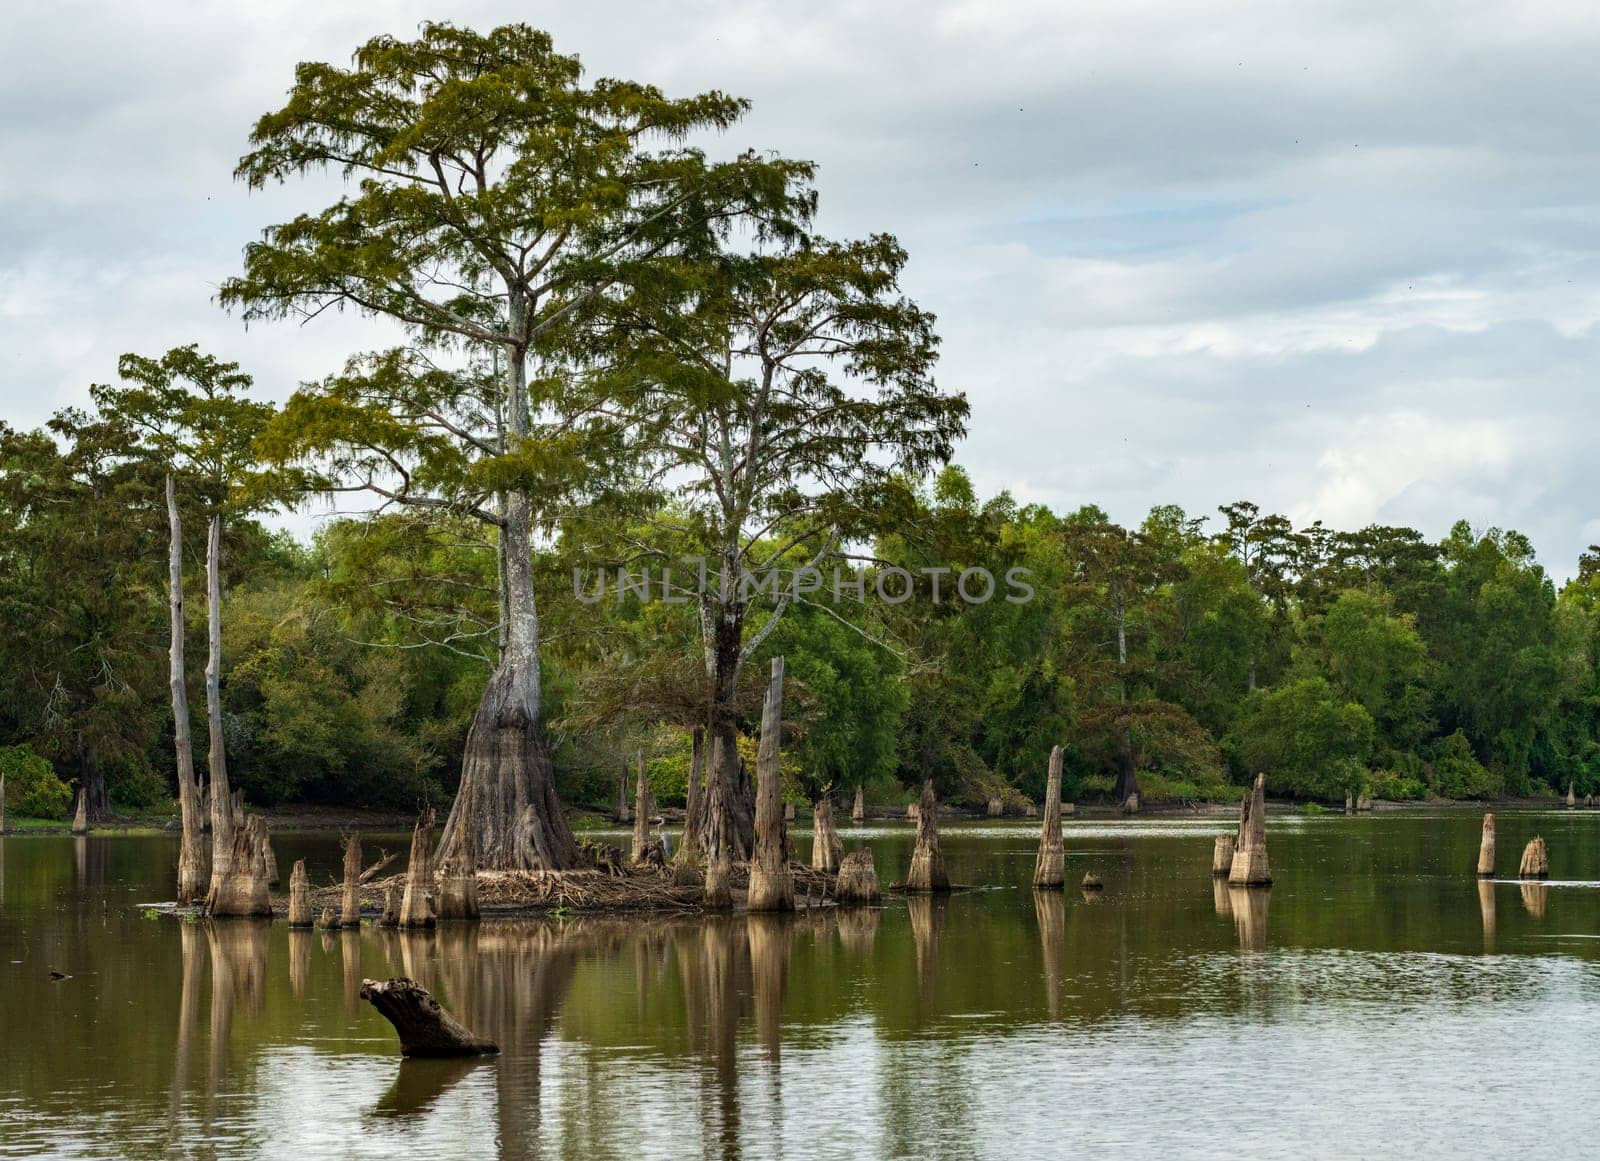 Large bald cypress trees rise out of water in Atchafalaya basin by steheap